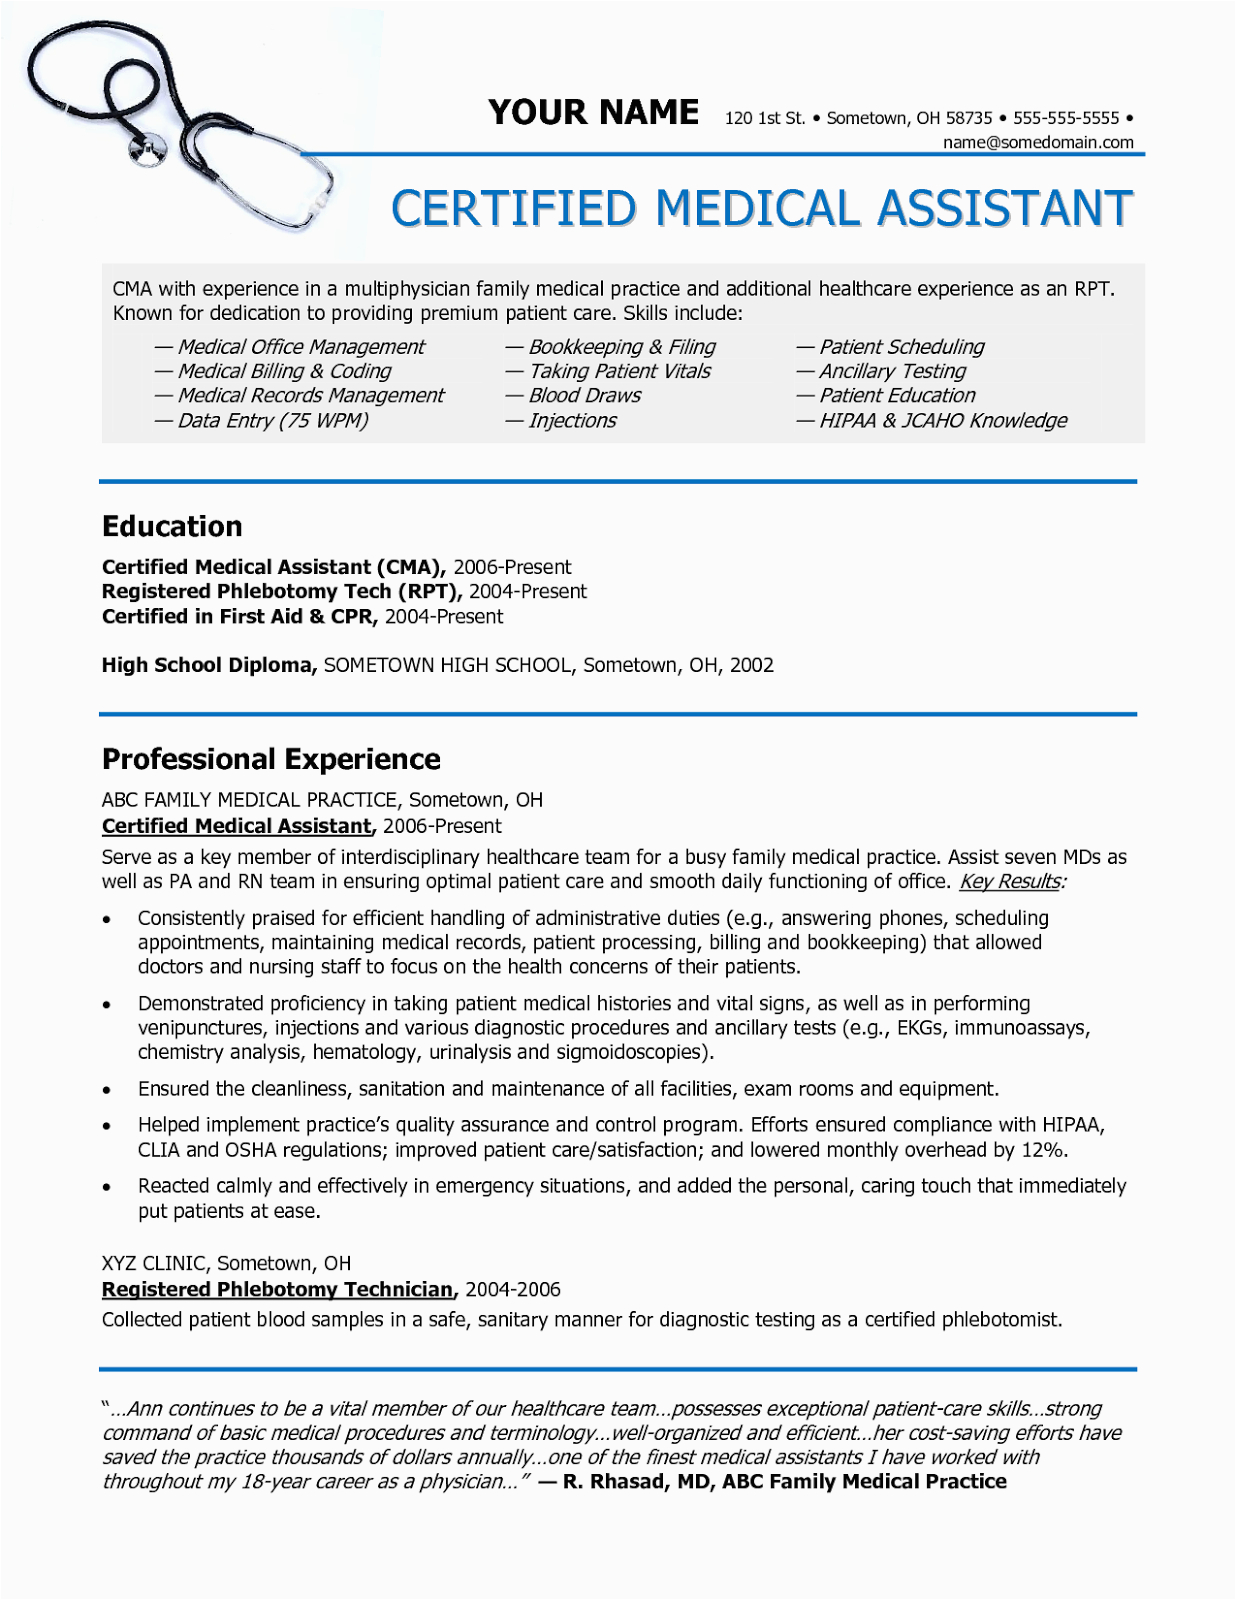 Samples Of Certified Medical assistant Resumes Sample Of A Medical assistant Resume